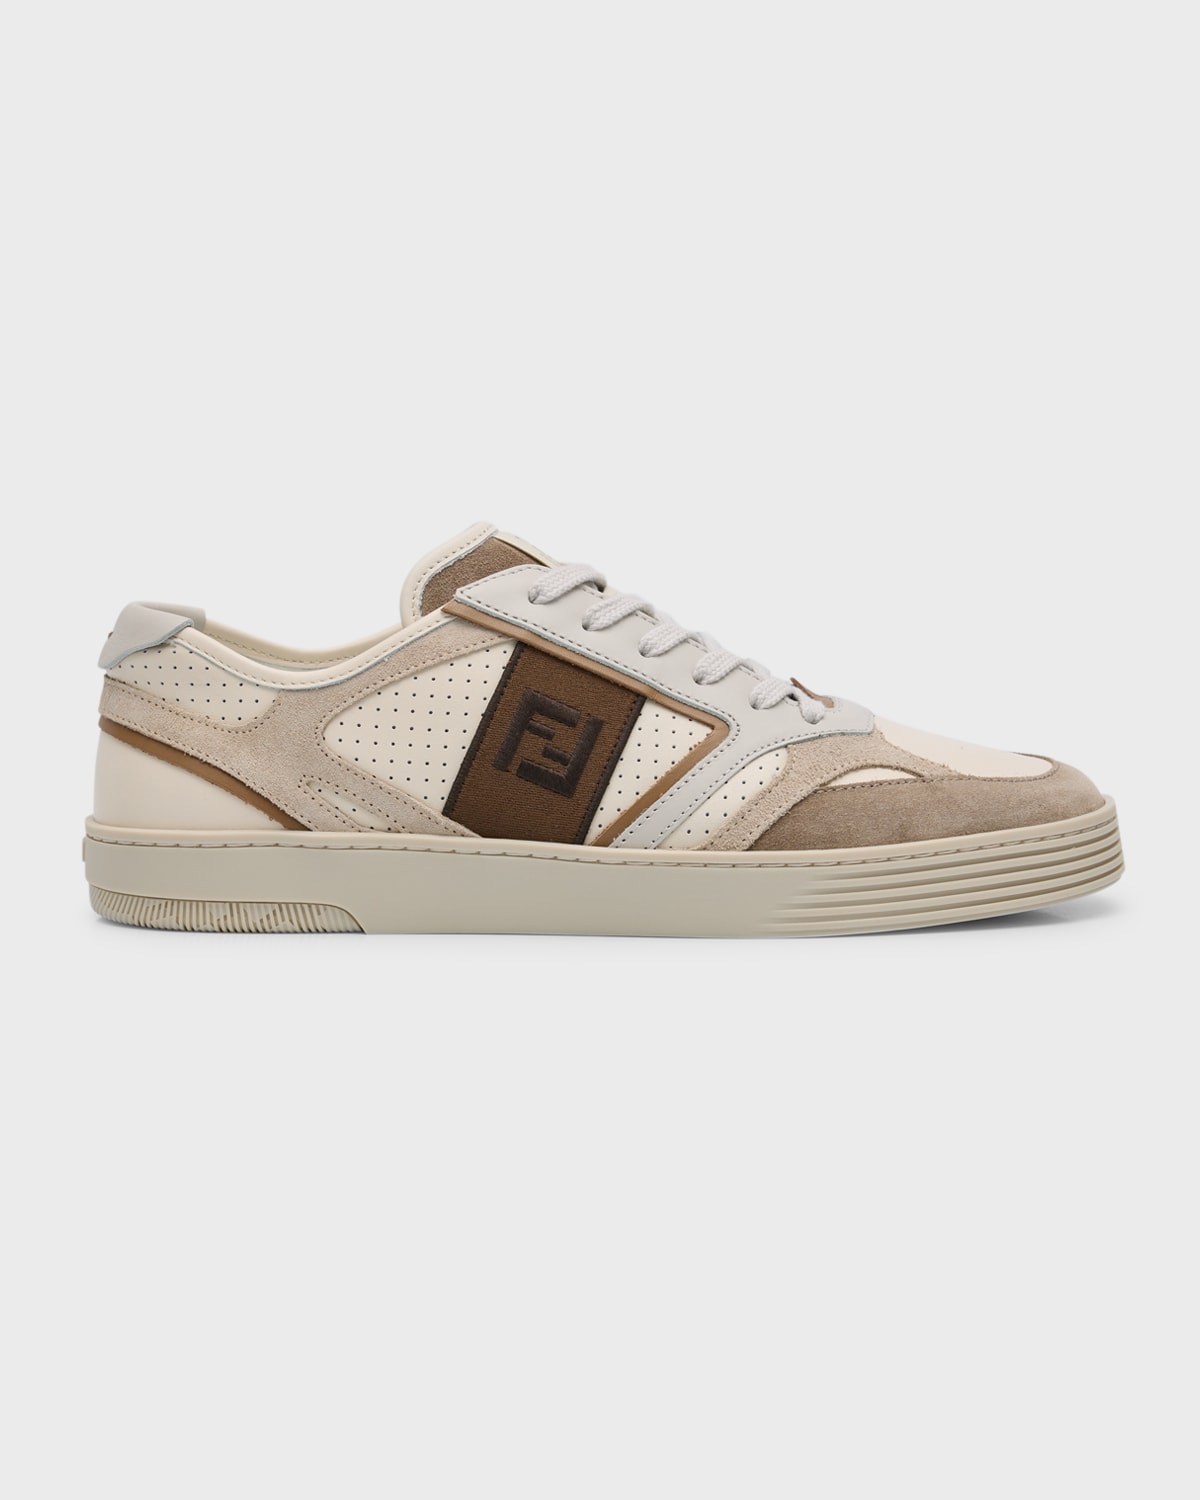 Fendi Men's Step Mix Low-top Sneakers In Off White/brown